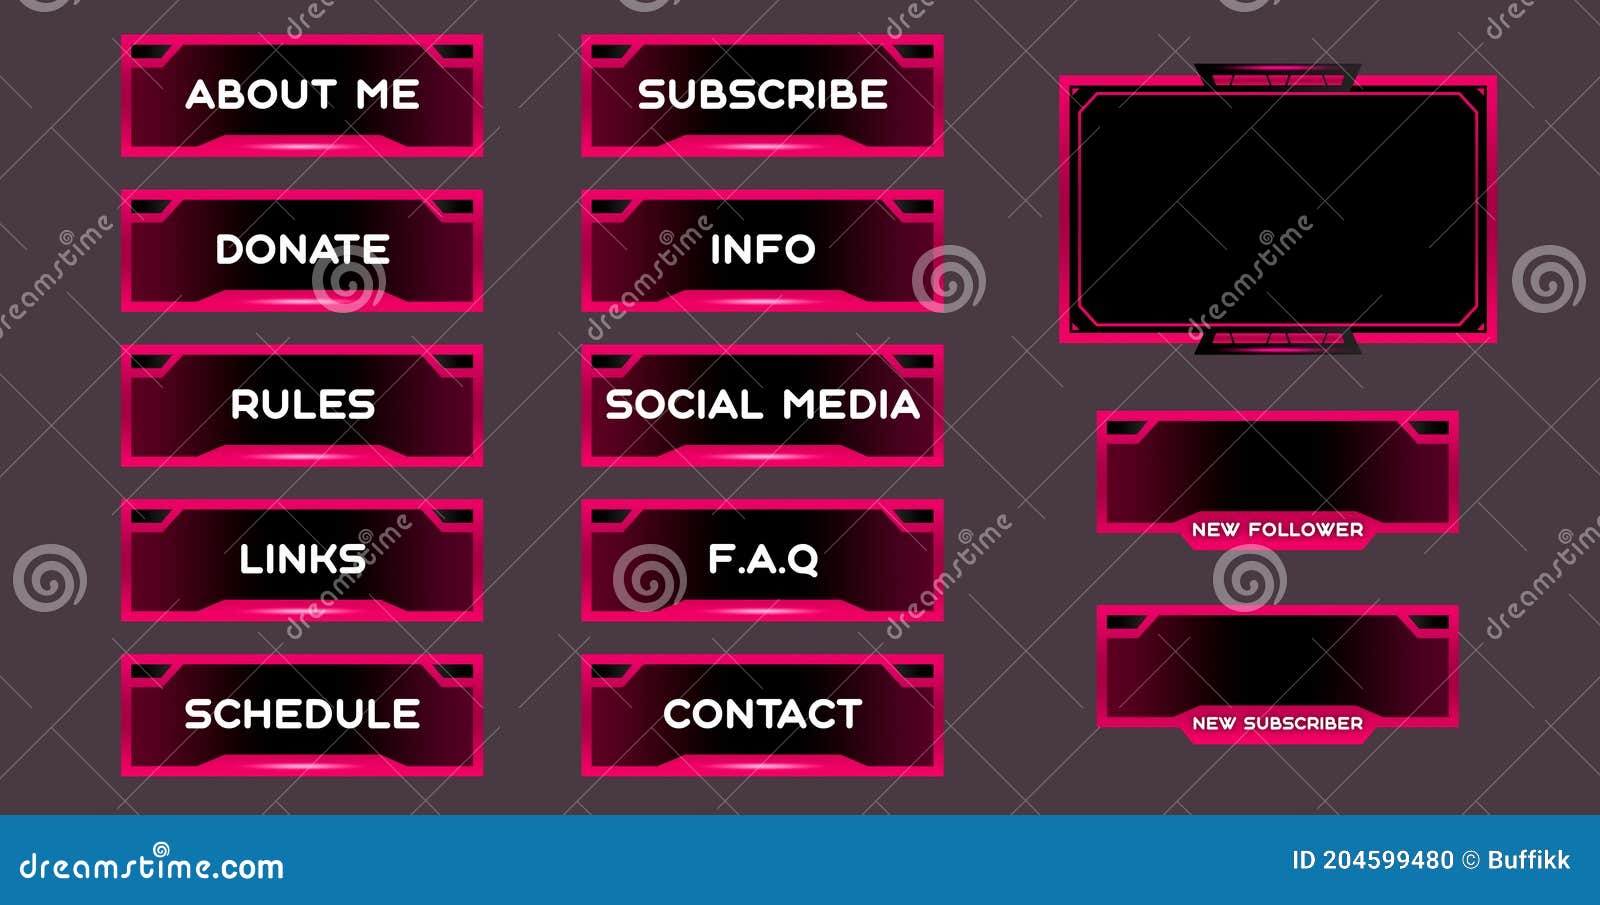 Twitch Set Of Modern Pink Gaming Panels And Overlays For Live Streamers Design Alerts And Buttons For Streaming 16 9 And 4 3 Scr Stock Illustration Illustration Of Offline Streaming